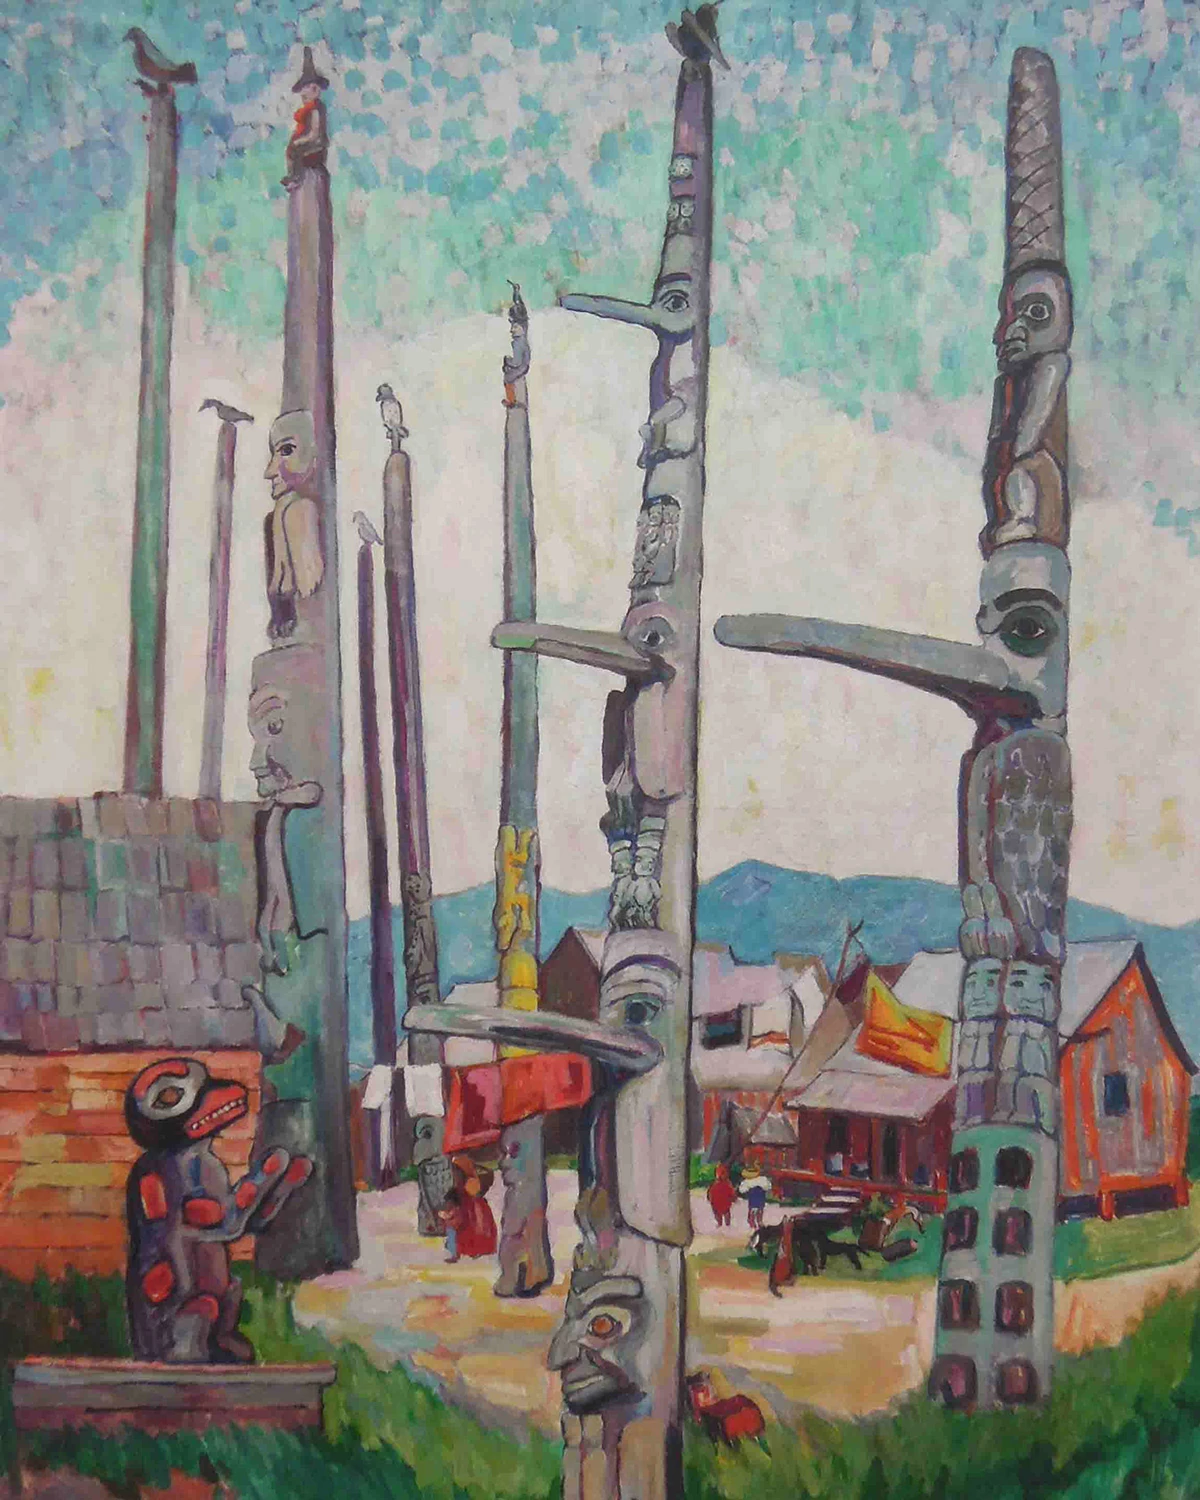 Emily Carr, The Artists